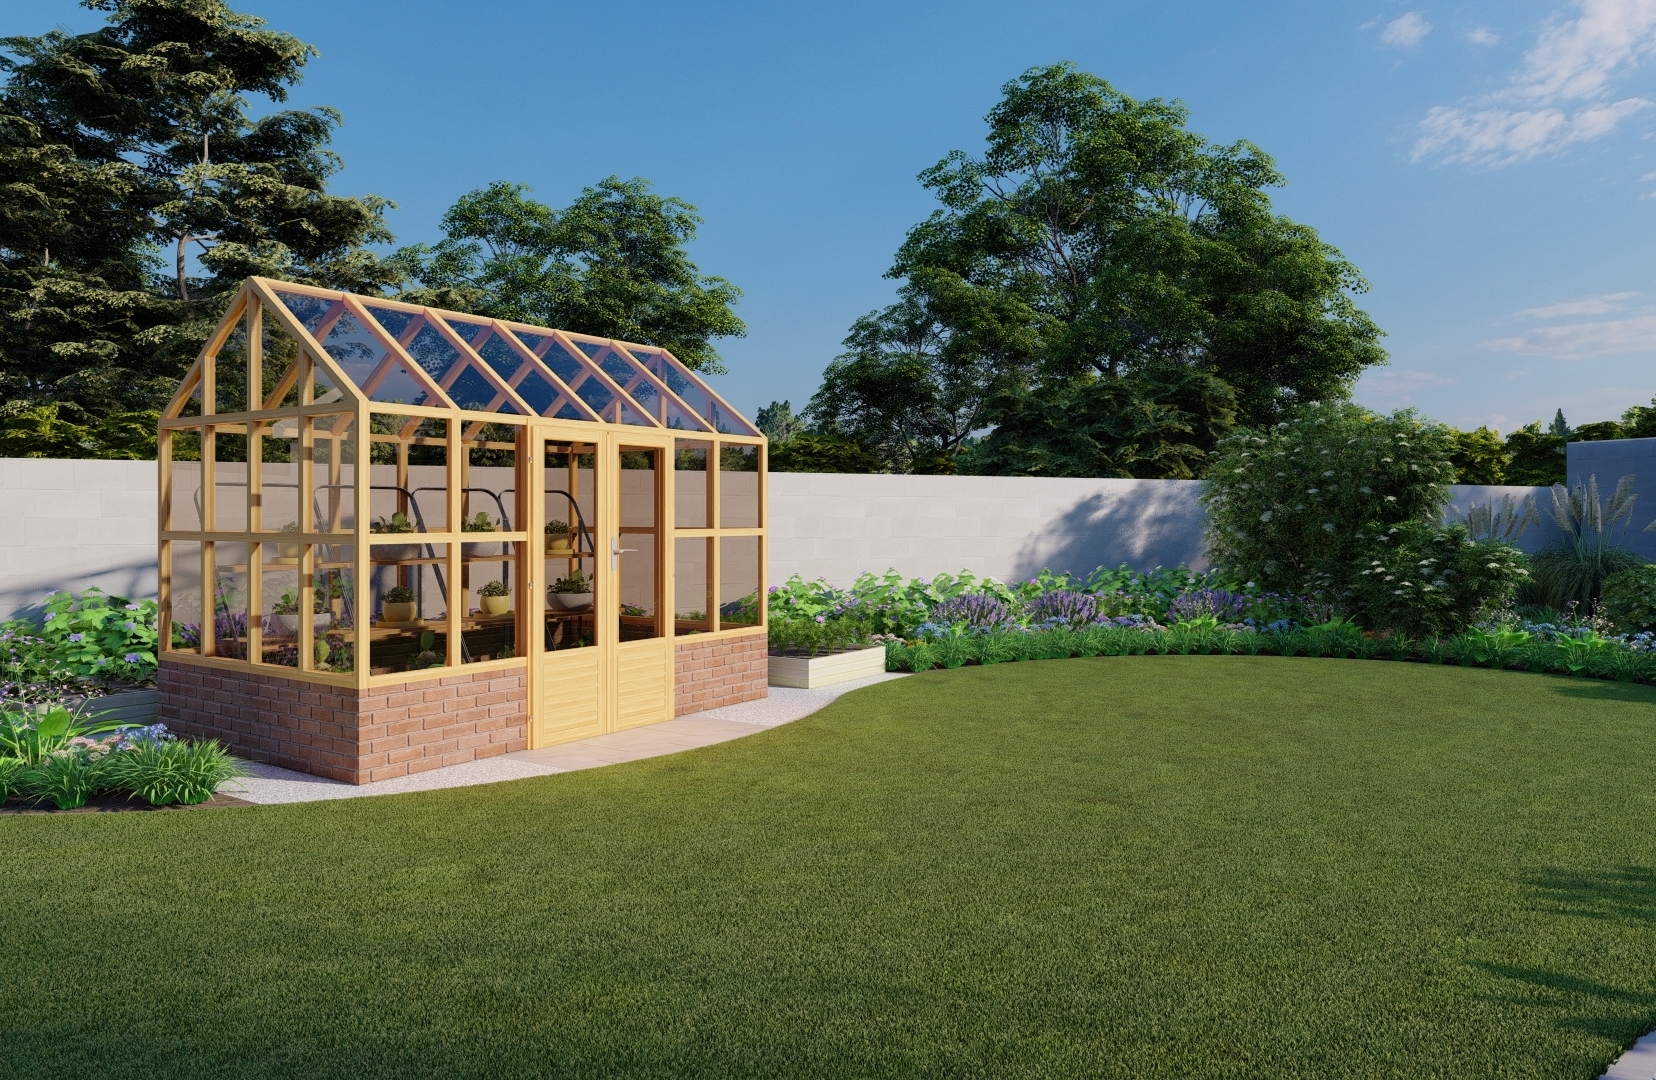 Visuals for a large Family Garden with Greenhouse, Growing Beds, extensive planted borders, beds and 'adventure' trail area featuring planted roundabouts/mounds in Knocklyon. ing bespoke horizontal timber screening, natural grass lawn, limestone paving, Biohort Garden Shed and mixed low maintenance  planting.